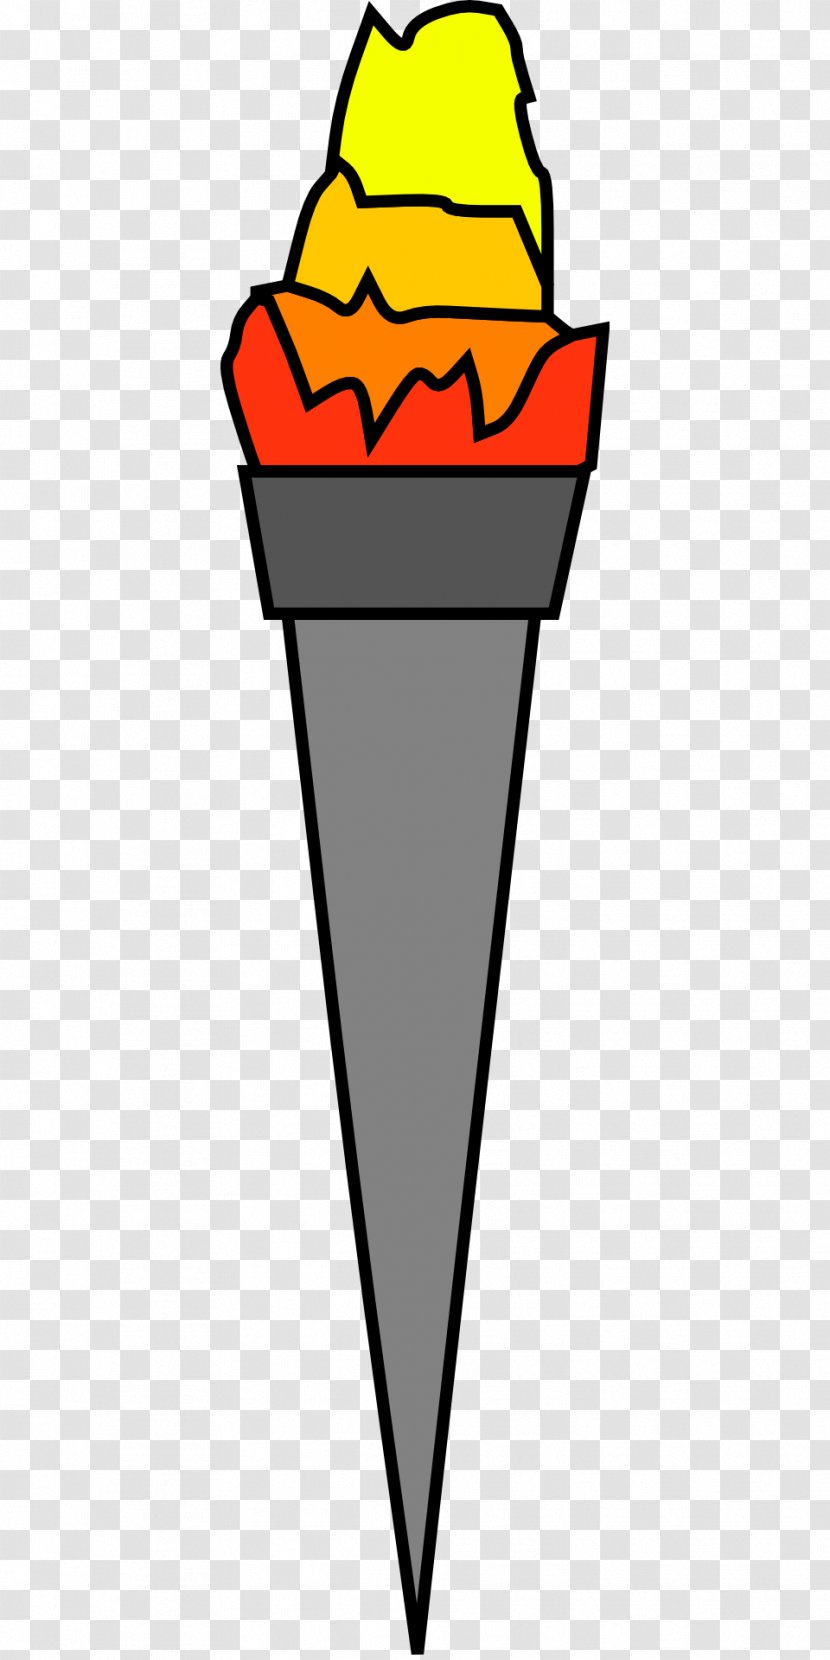 Olympic Games Torch - Flame - Burn Transparent PNG